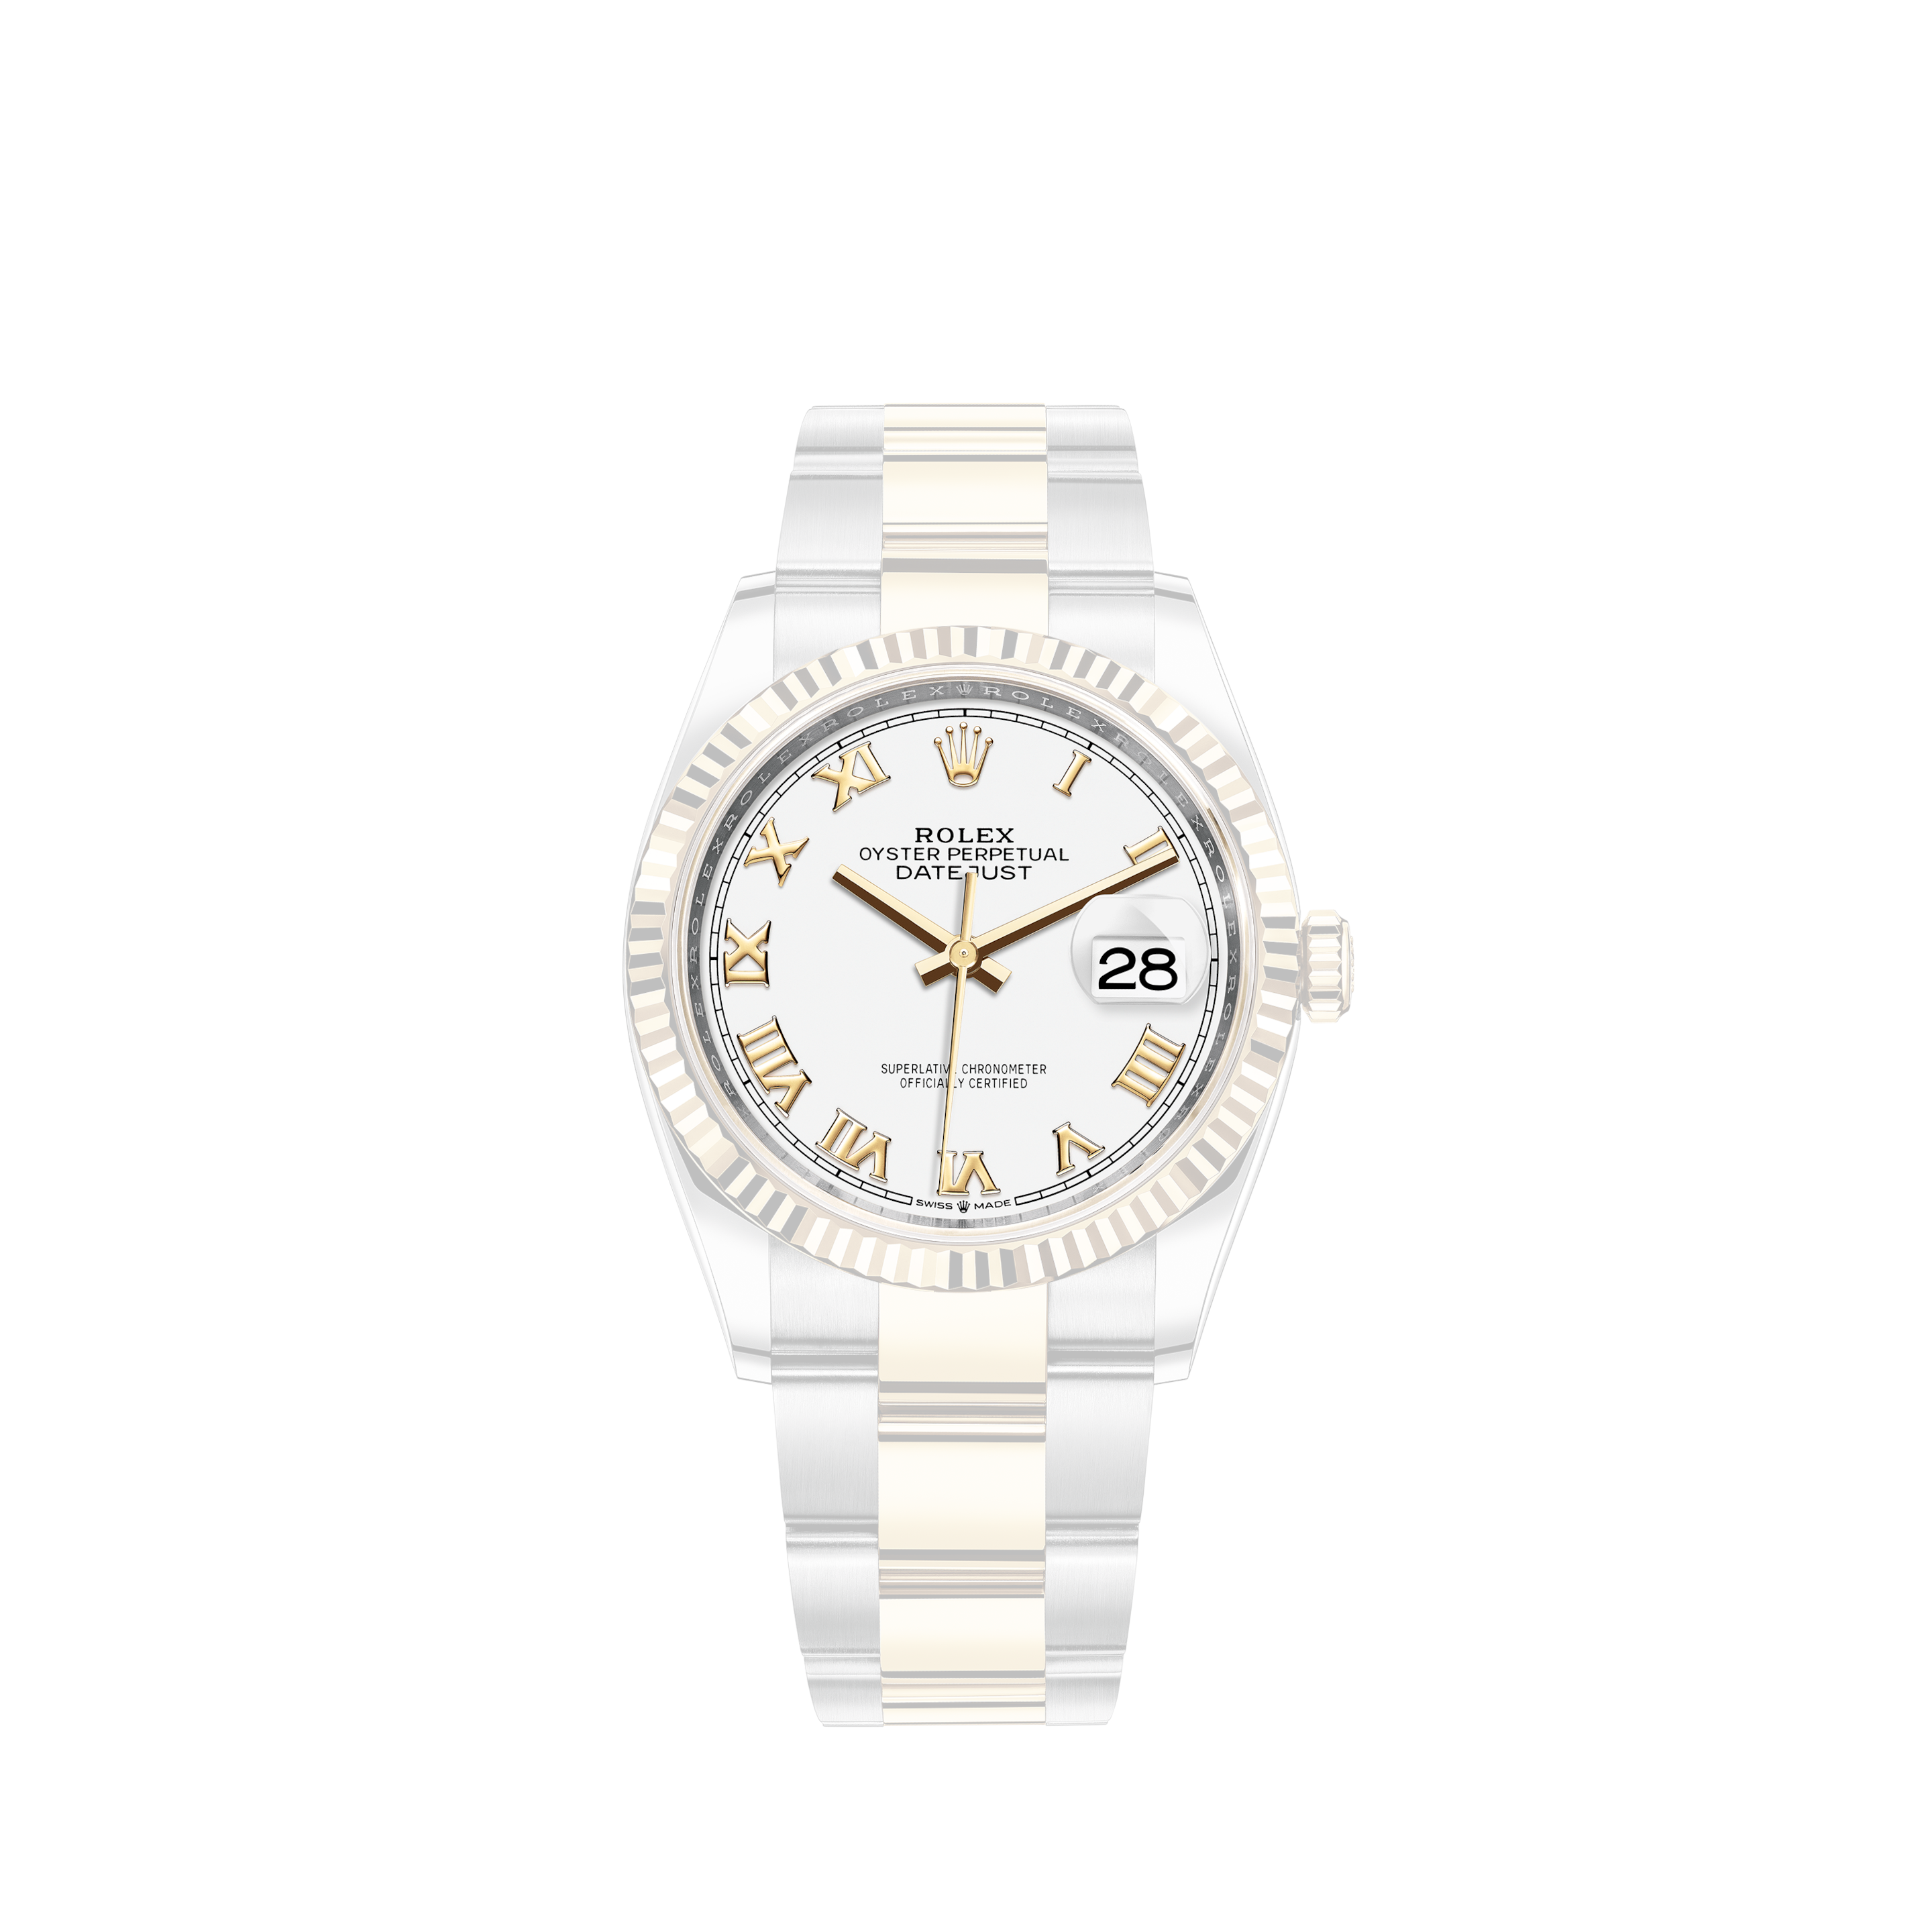 Rolex 36mm Oyster Perpetual Datejust Black Mother of Pearl String Diamond Dial 16030Rolex 36mm Oyster Perpetual Datejust Champagne Face with Diamonds Two Tone Watch